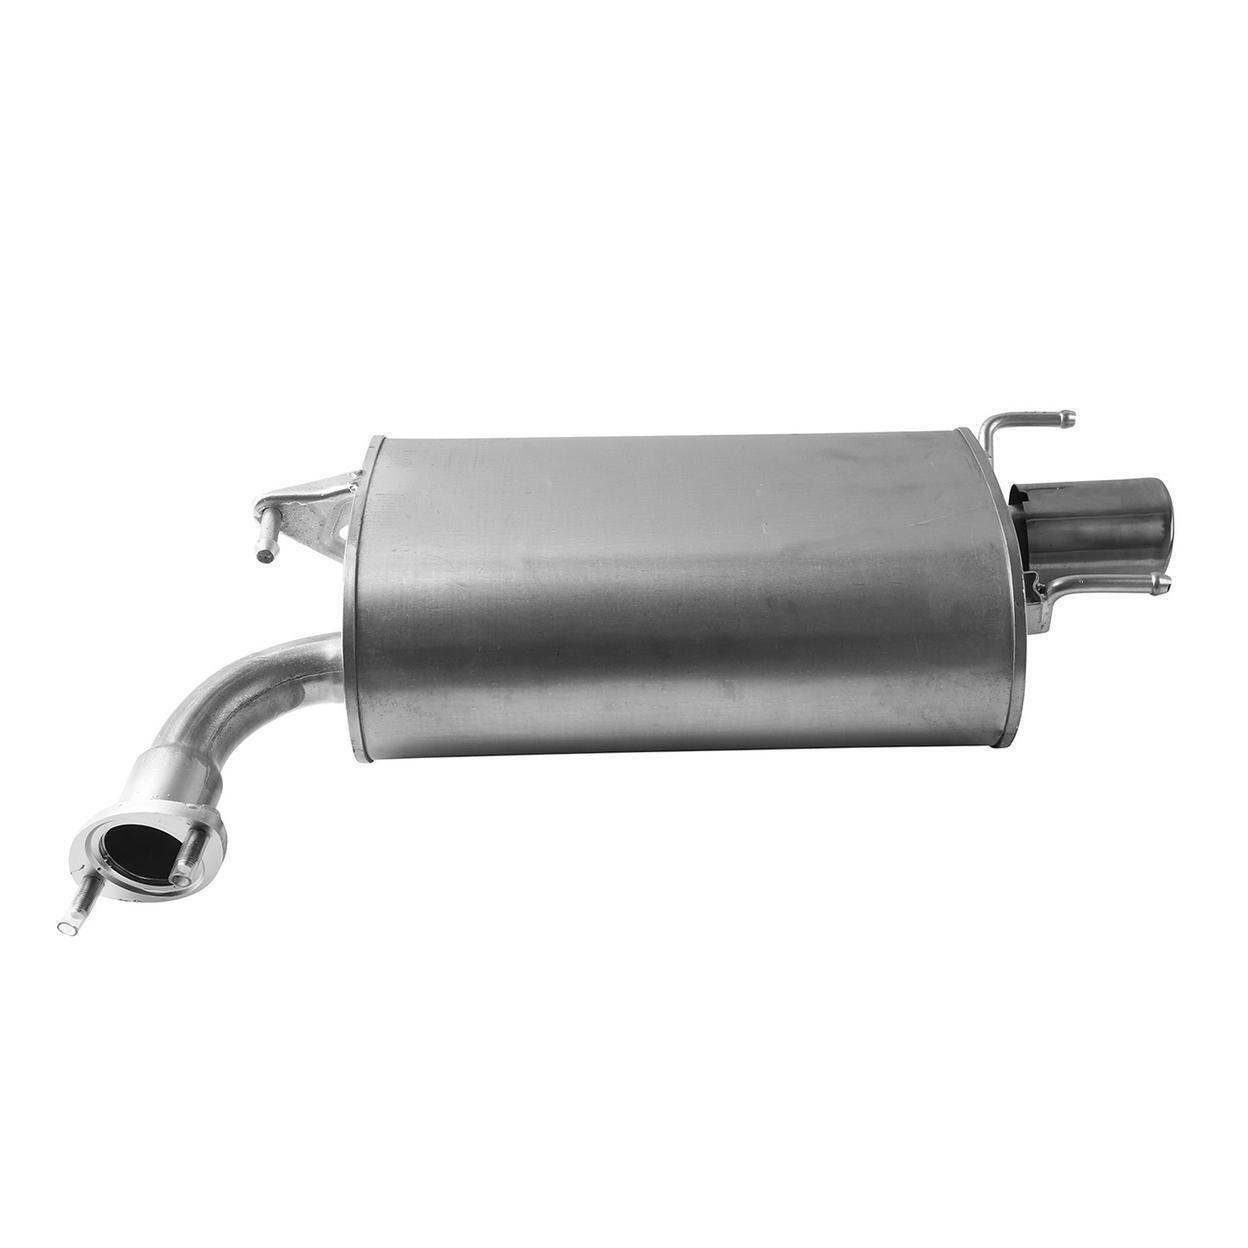 Exhaust Muffler for 2007-2010 Toyota Camry Hybrid 2.4L L4 ELECTRIC/GAS DOHC